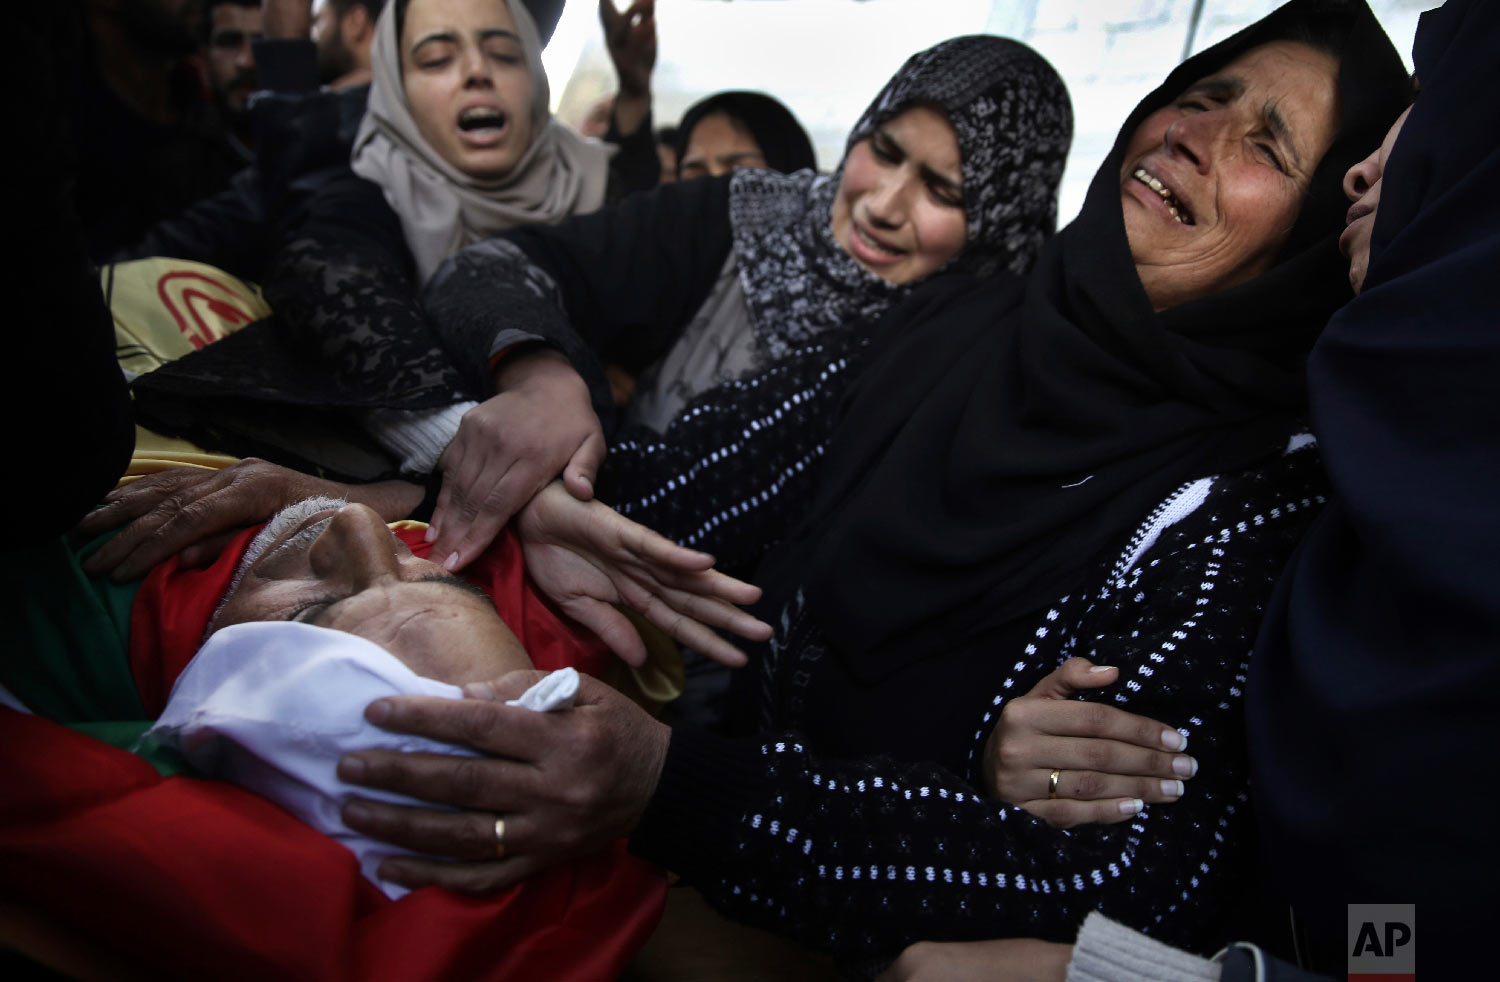  Relatives of Palestinian 59-year-old farmer, Muhammed Abu Jamaa, mourn over his body in the family house during his funeral in town of Khan Younis, southern Gaza Strip, Sunday, March 4, 2018. (AP Photo/ Khalil Hamra) 